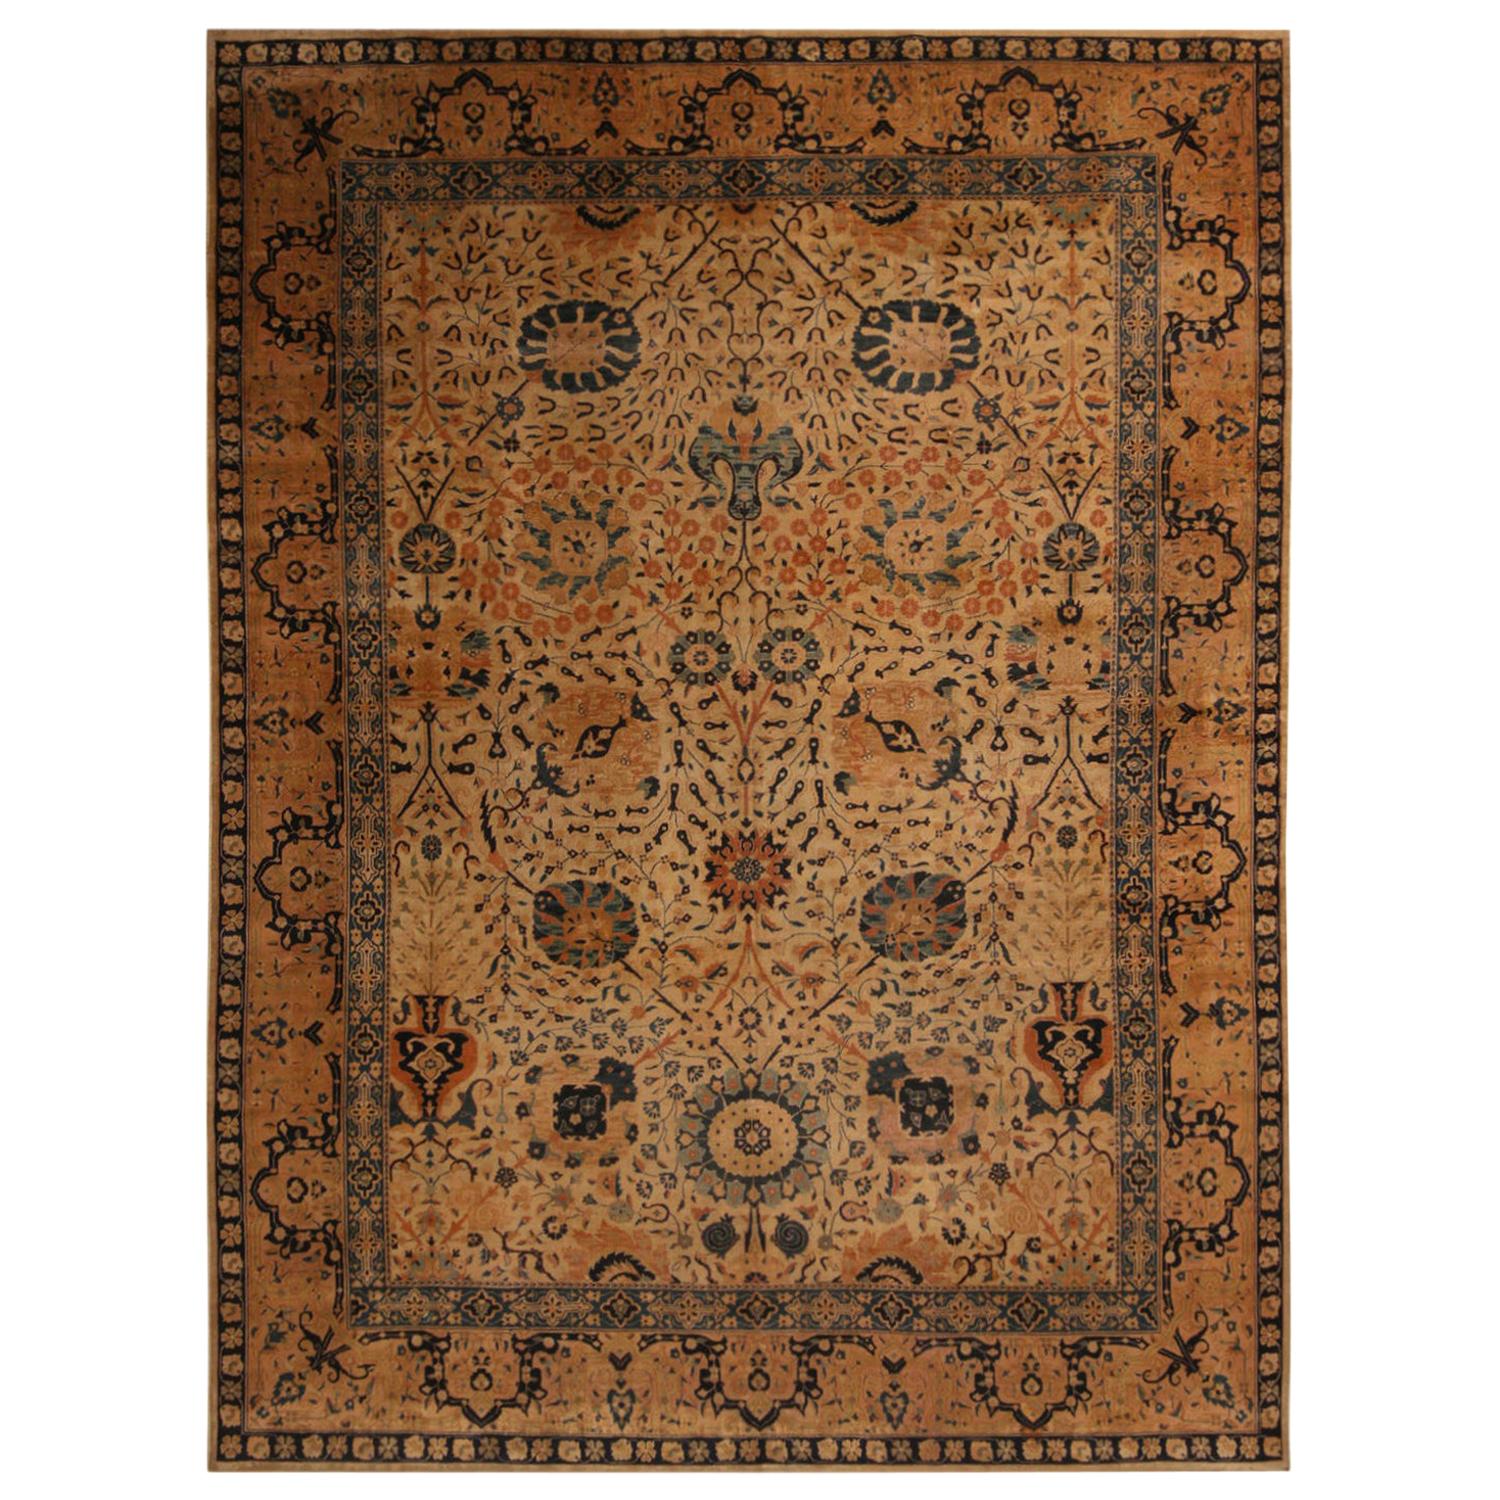 Antique Tabriz Golden-Brown Wool Rug with Blue Accents by Rug & Kilim